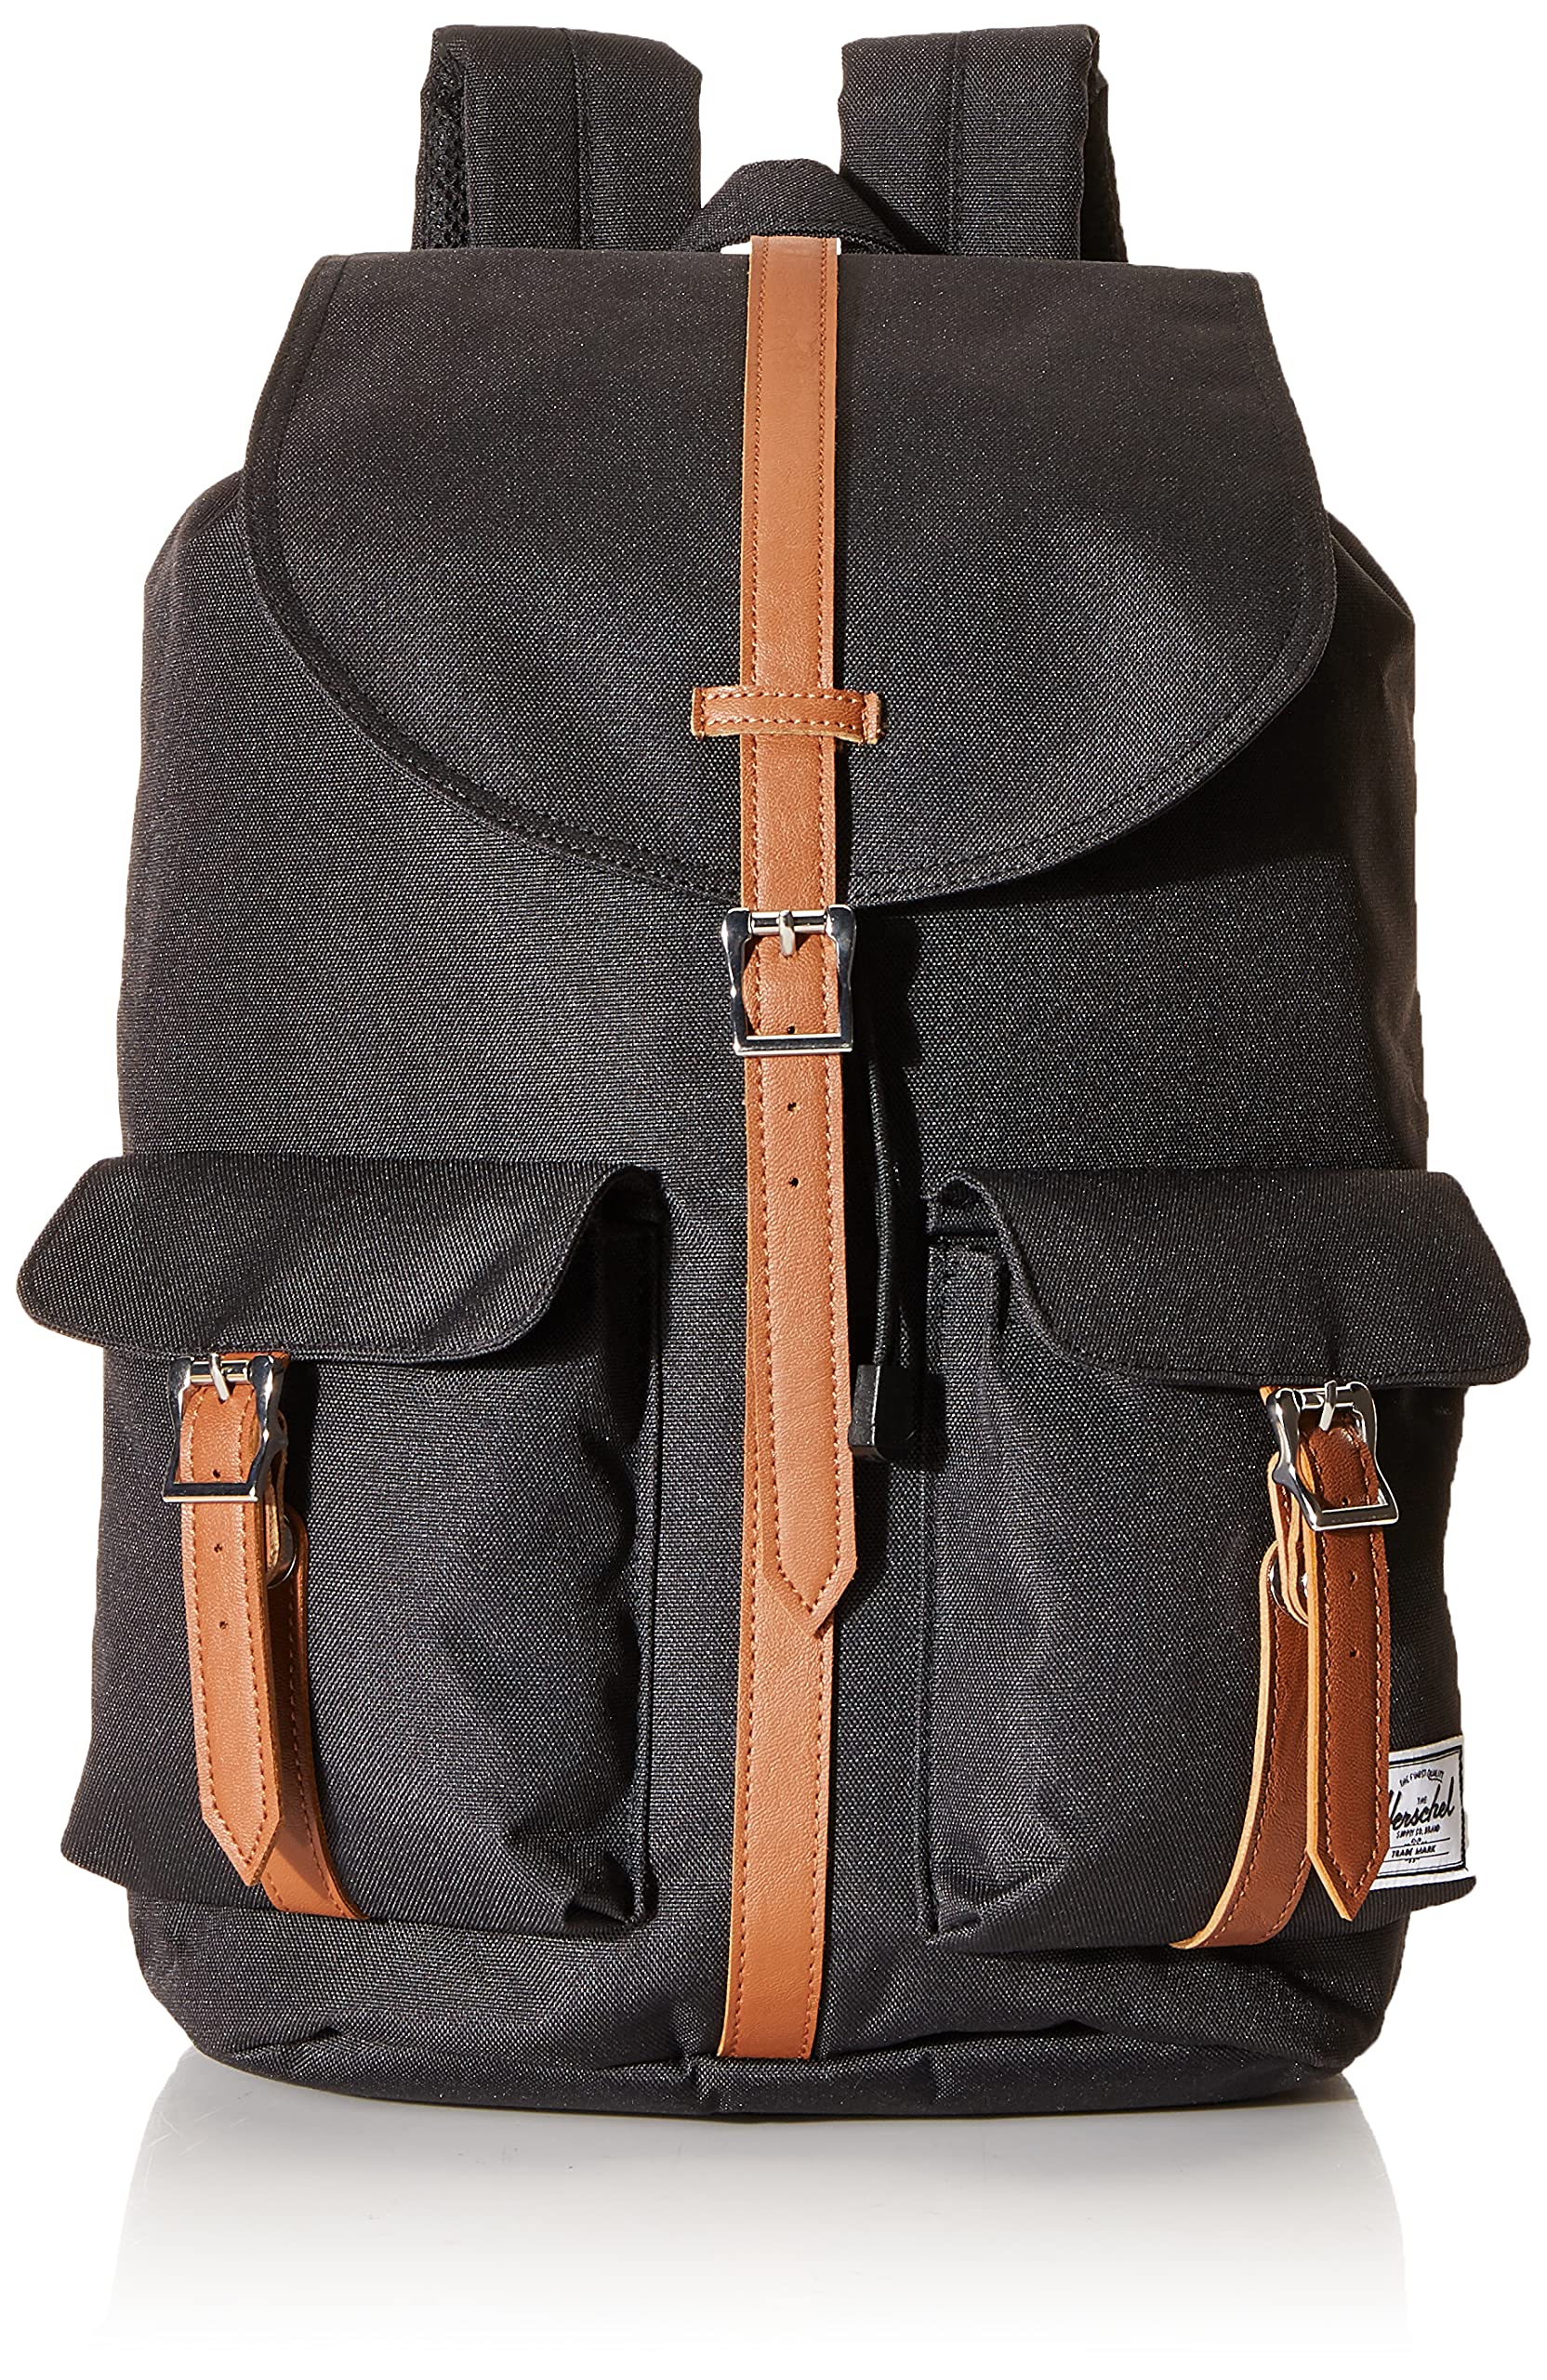 Herschel Dawson Backpack, Black/Tan Synthetic Leather, Classic 20.5L